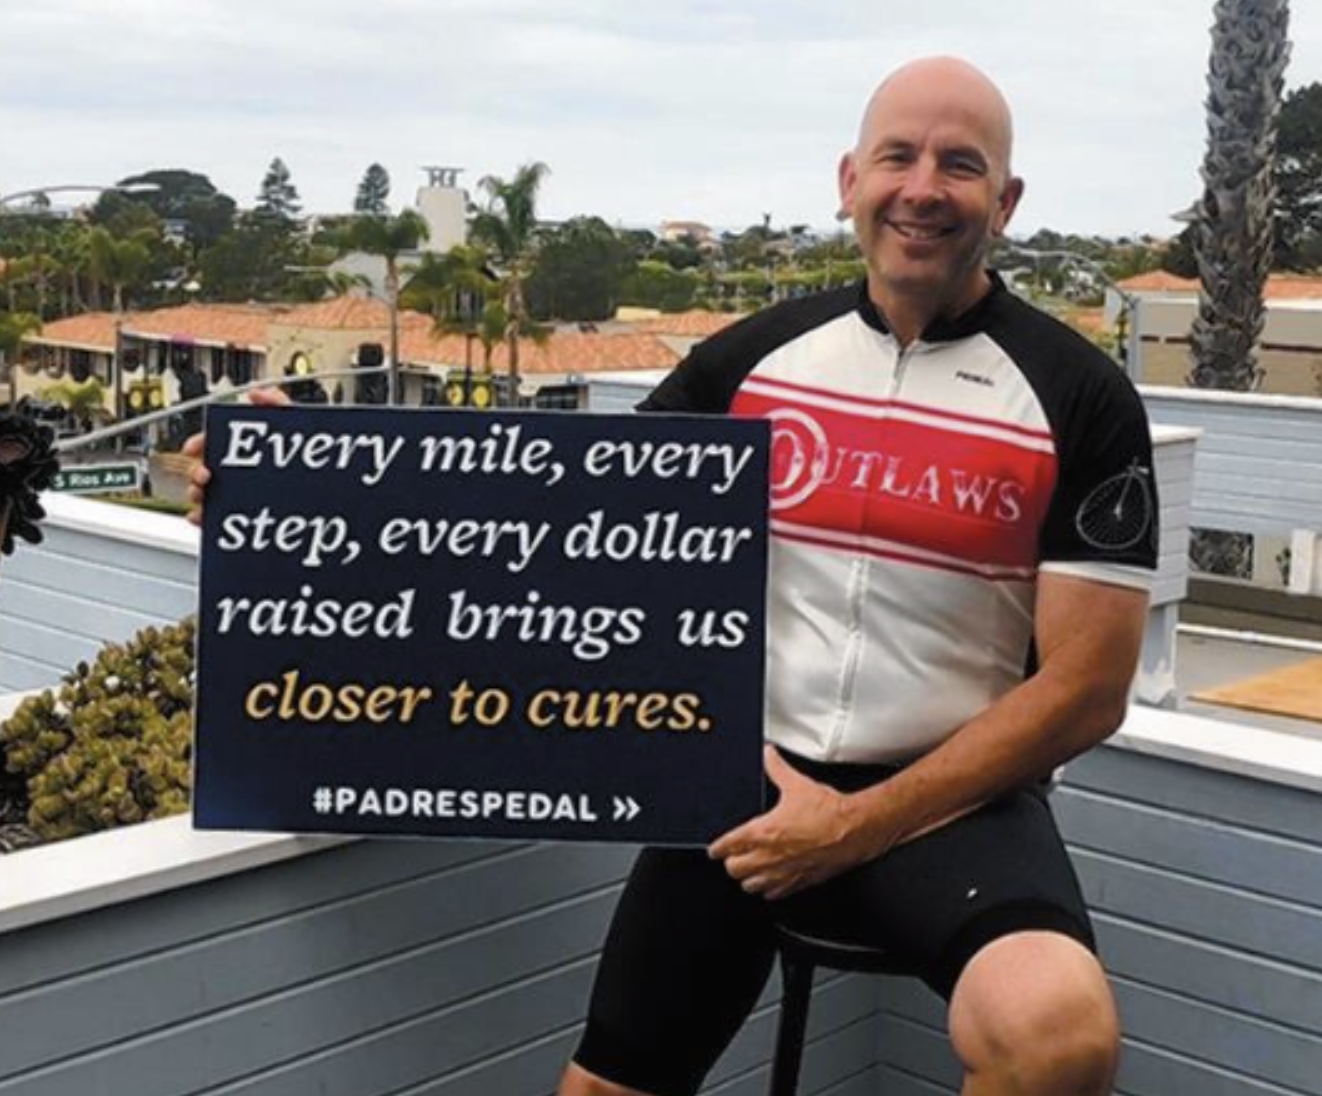 RSF cancer survivor celebrates fundraising effort, Scott Thurman to cycle 55 miles in Padres Pedal the Cause undefined